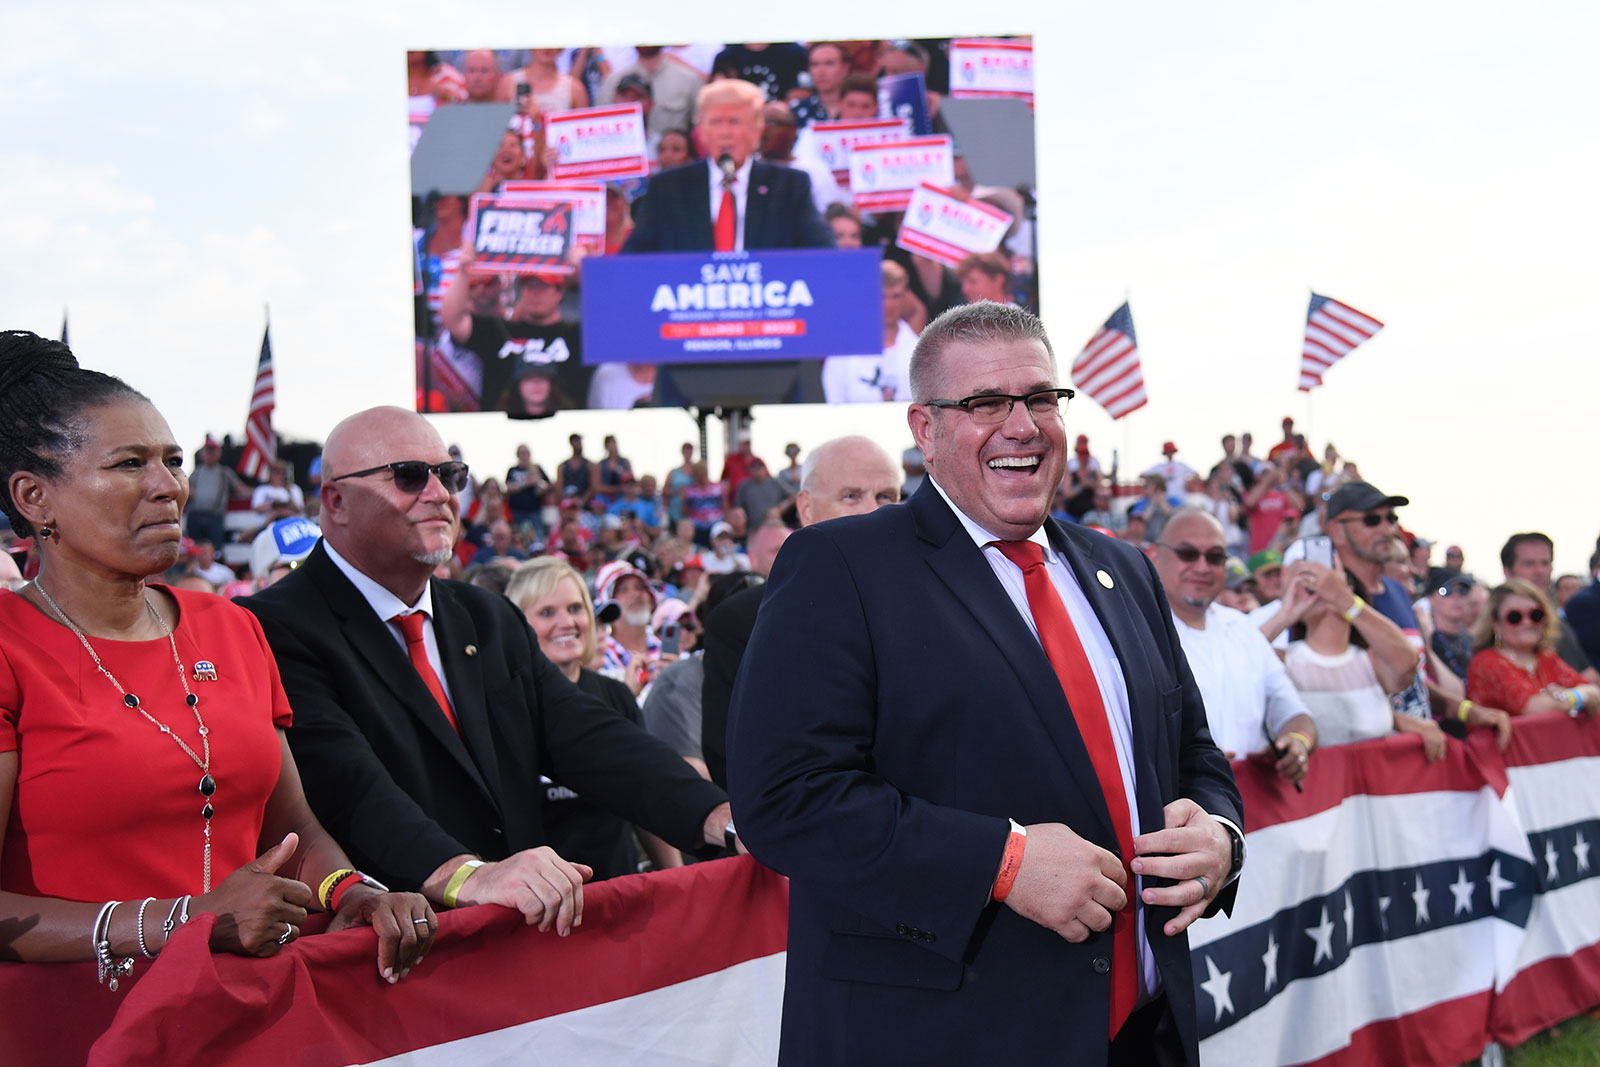 Darren Bailey smiles prior to receiving an endorsement from former President Donald Trump during a Save America Rally on June 25 in Mendon, Illinois.